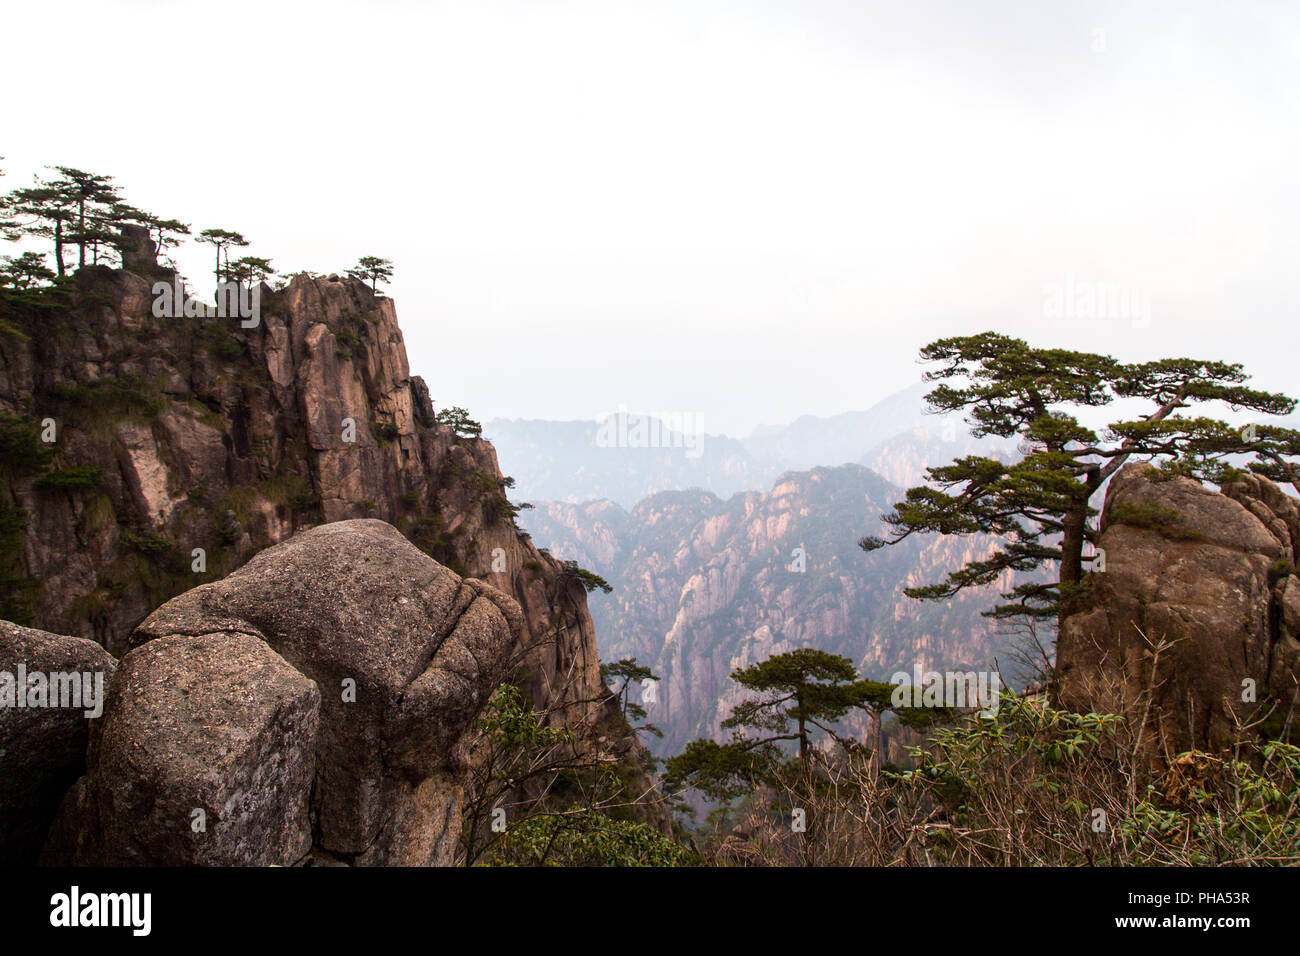 Rock formations in Huang Shan, China Stock Photo